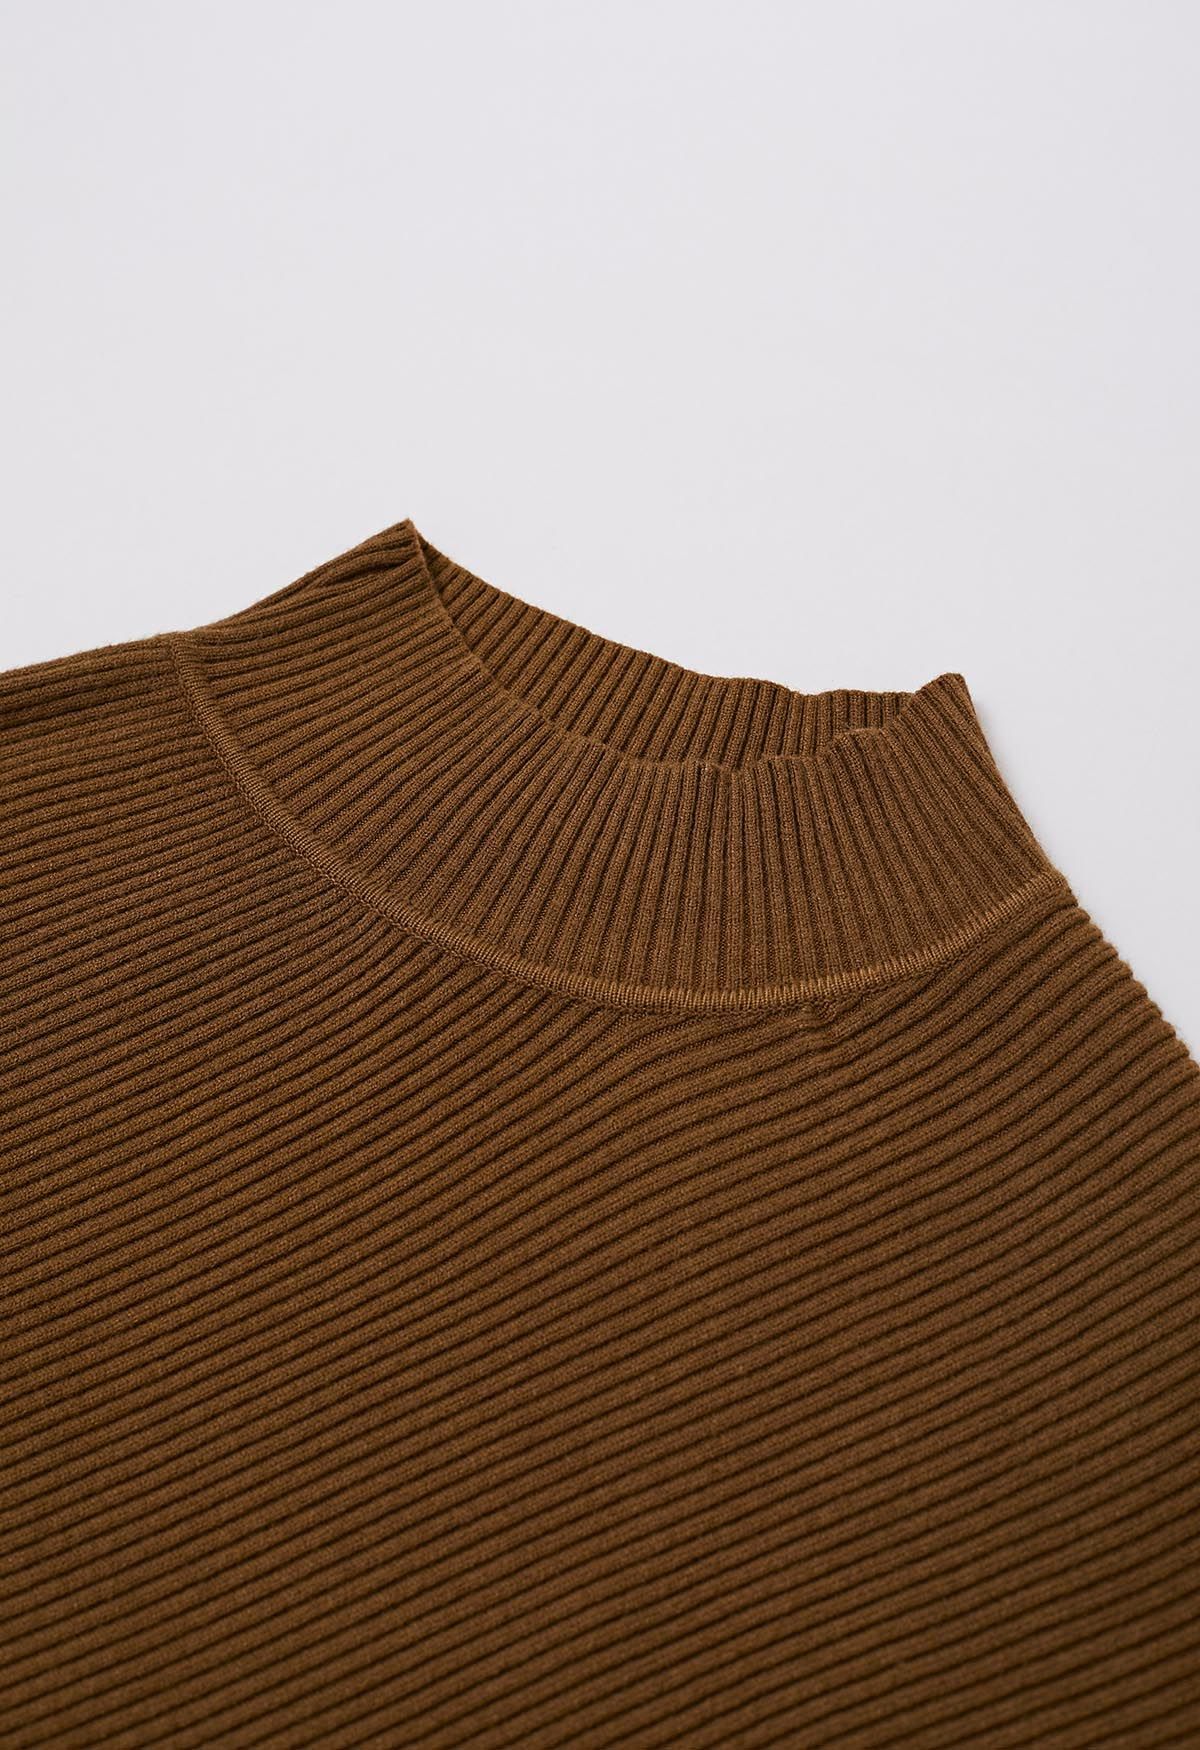 Asymmetric Batwing Sleeve Ribbed Knit Poncho in Caramel - Retro, Indie ...